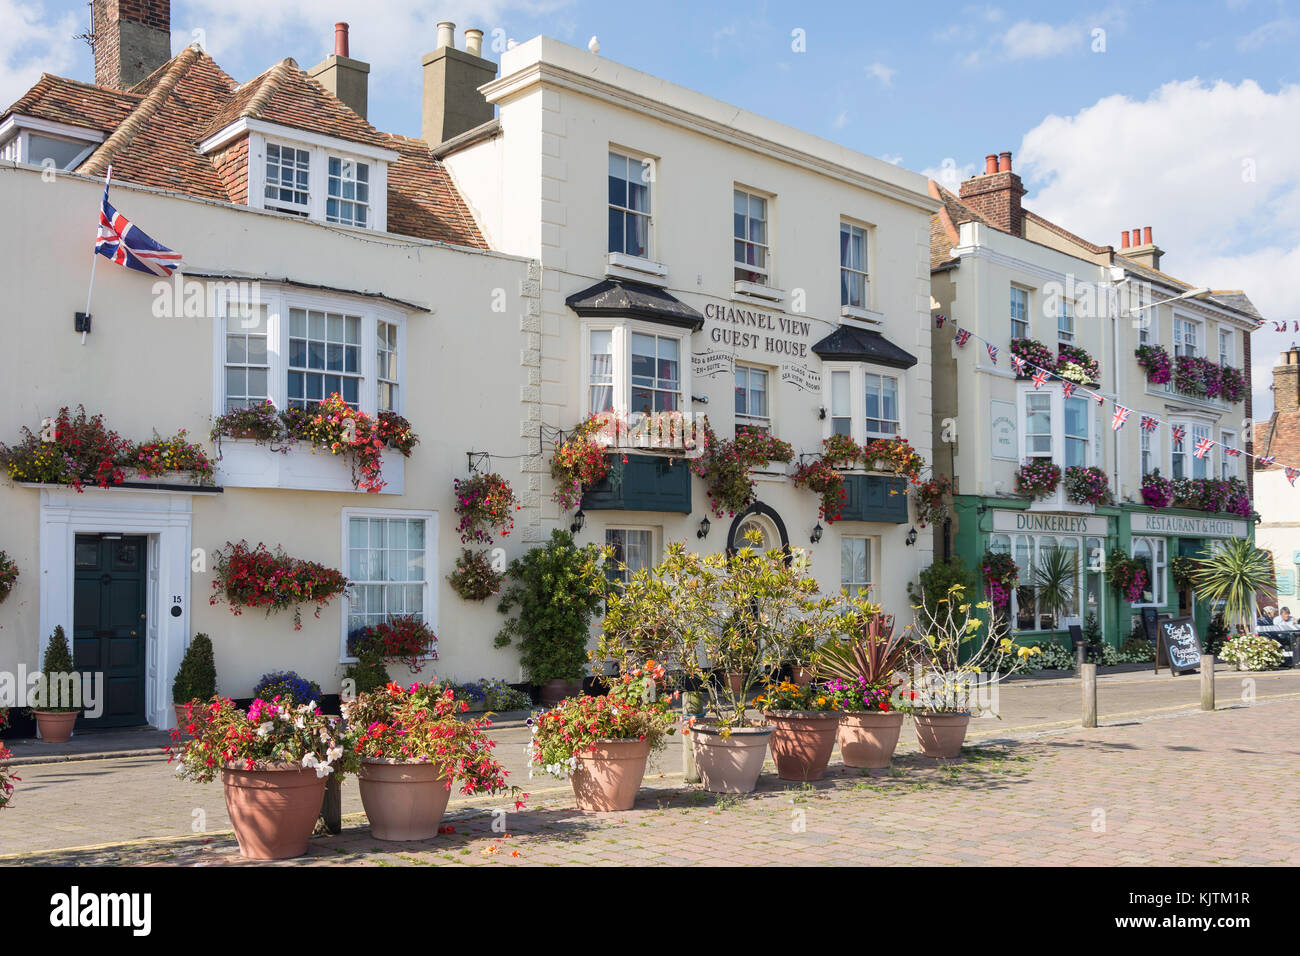 Channel View Guest House, Beach Street, Deal, Kent, England, United Kingdom Stock Photo